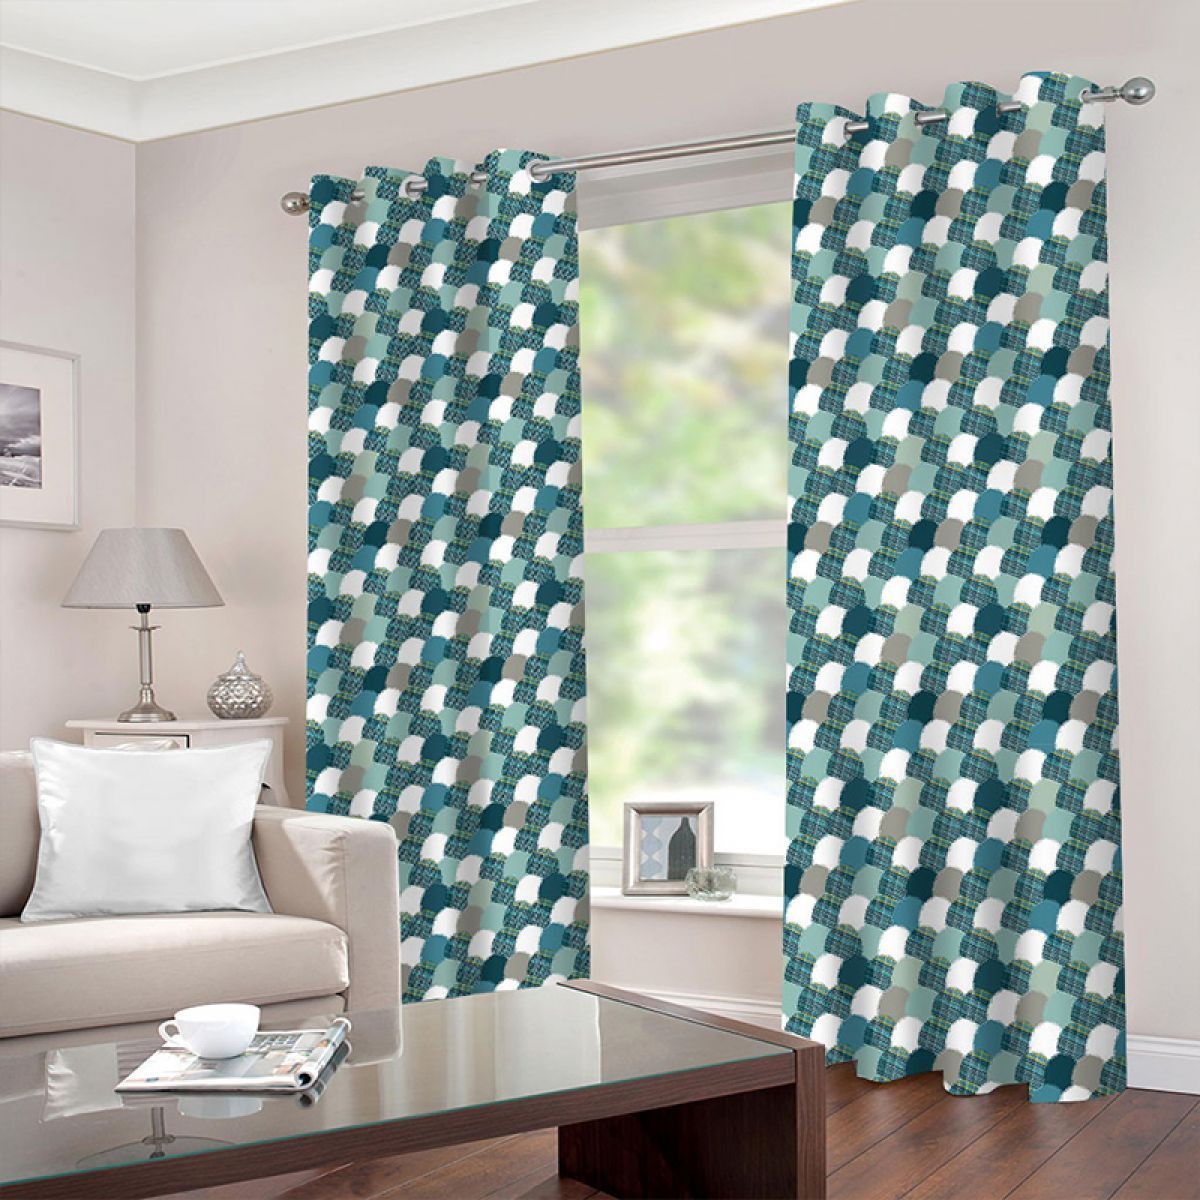 3d Fish Scale Pattern Printed Window Curtain Home Decor